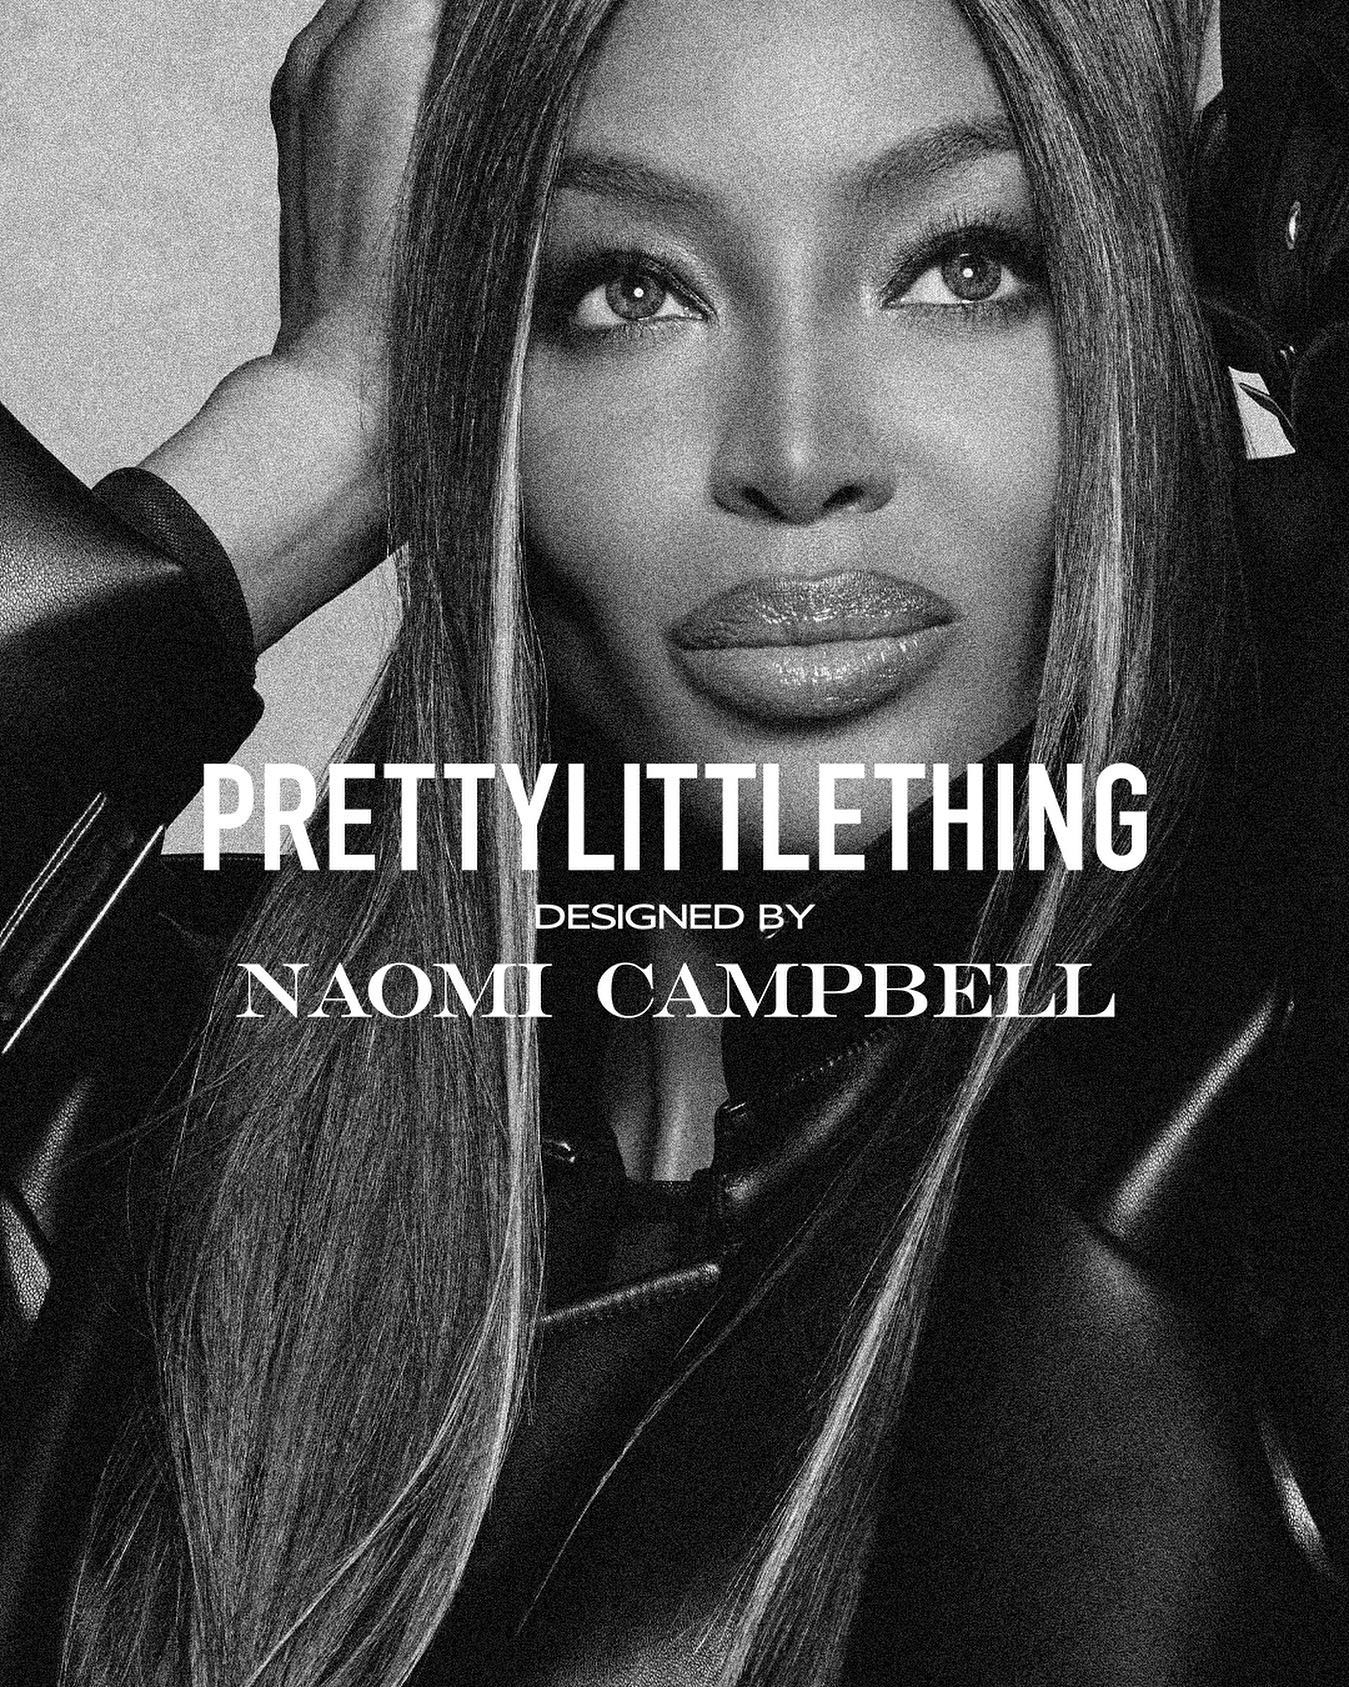 5th September. New York City. PrettyLittleThing Designed by Naomi Campbell.